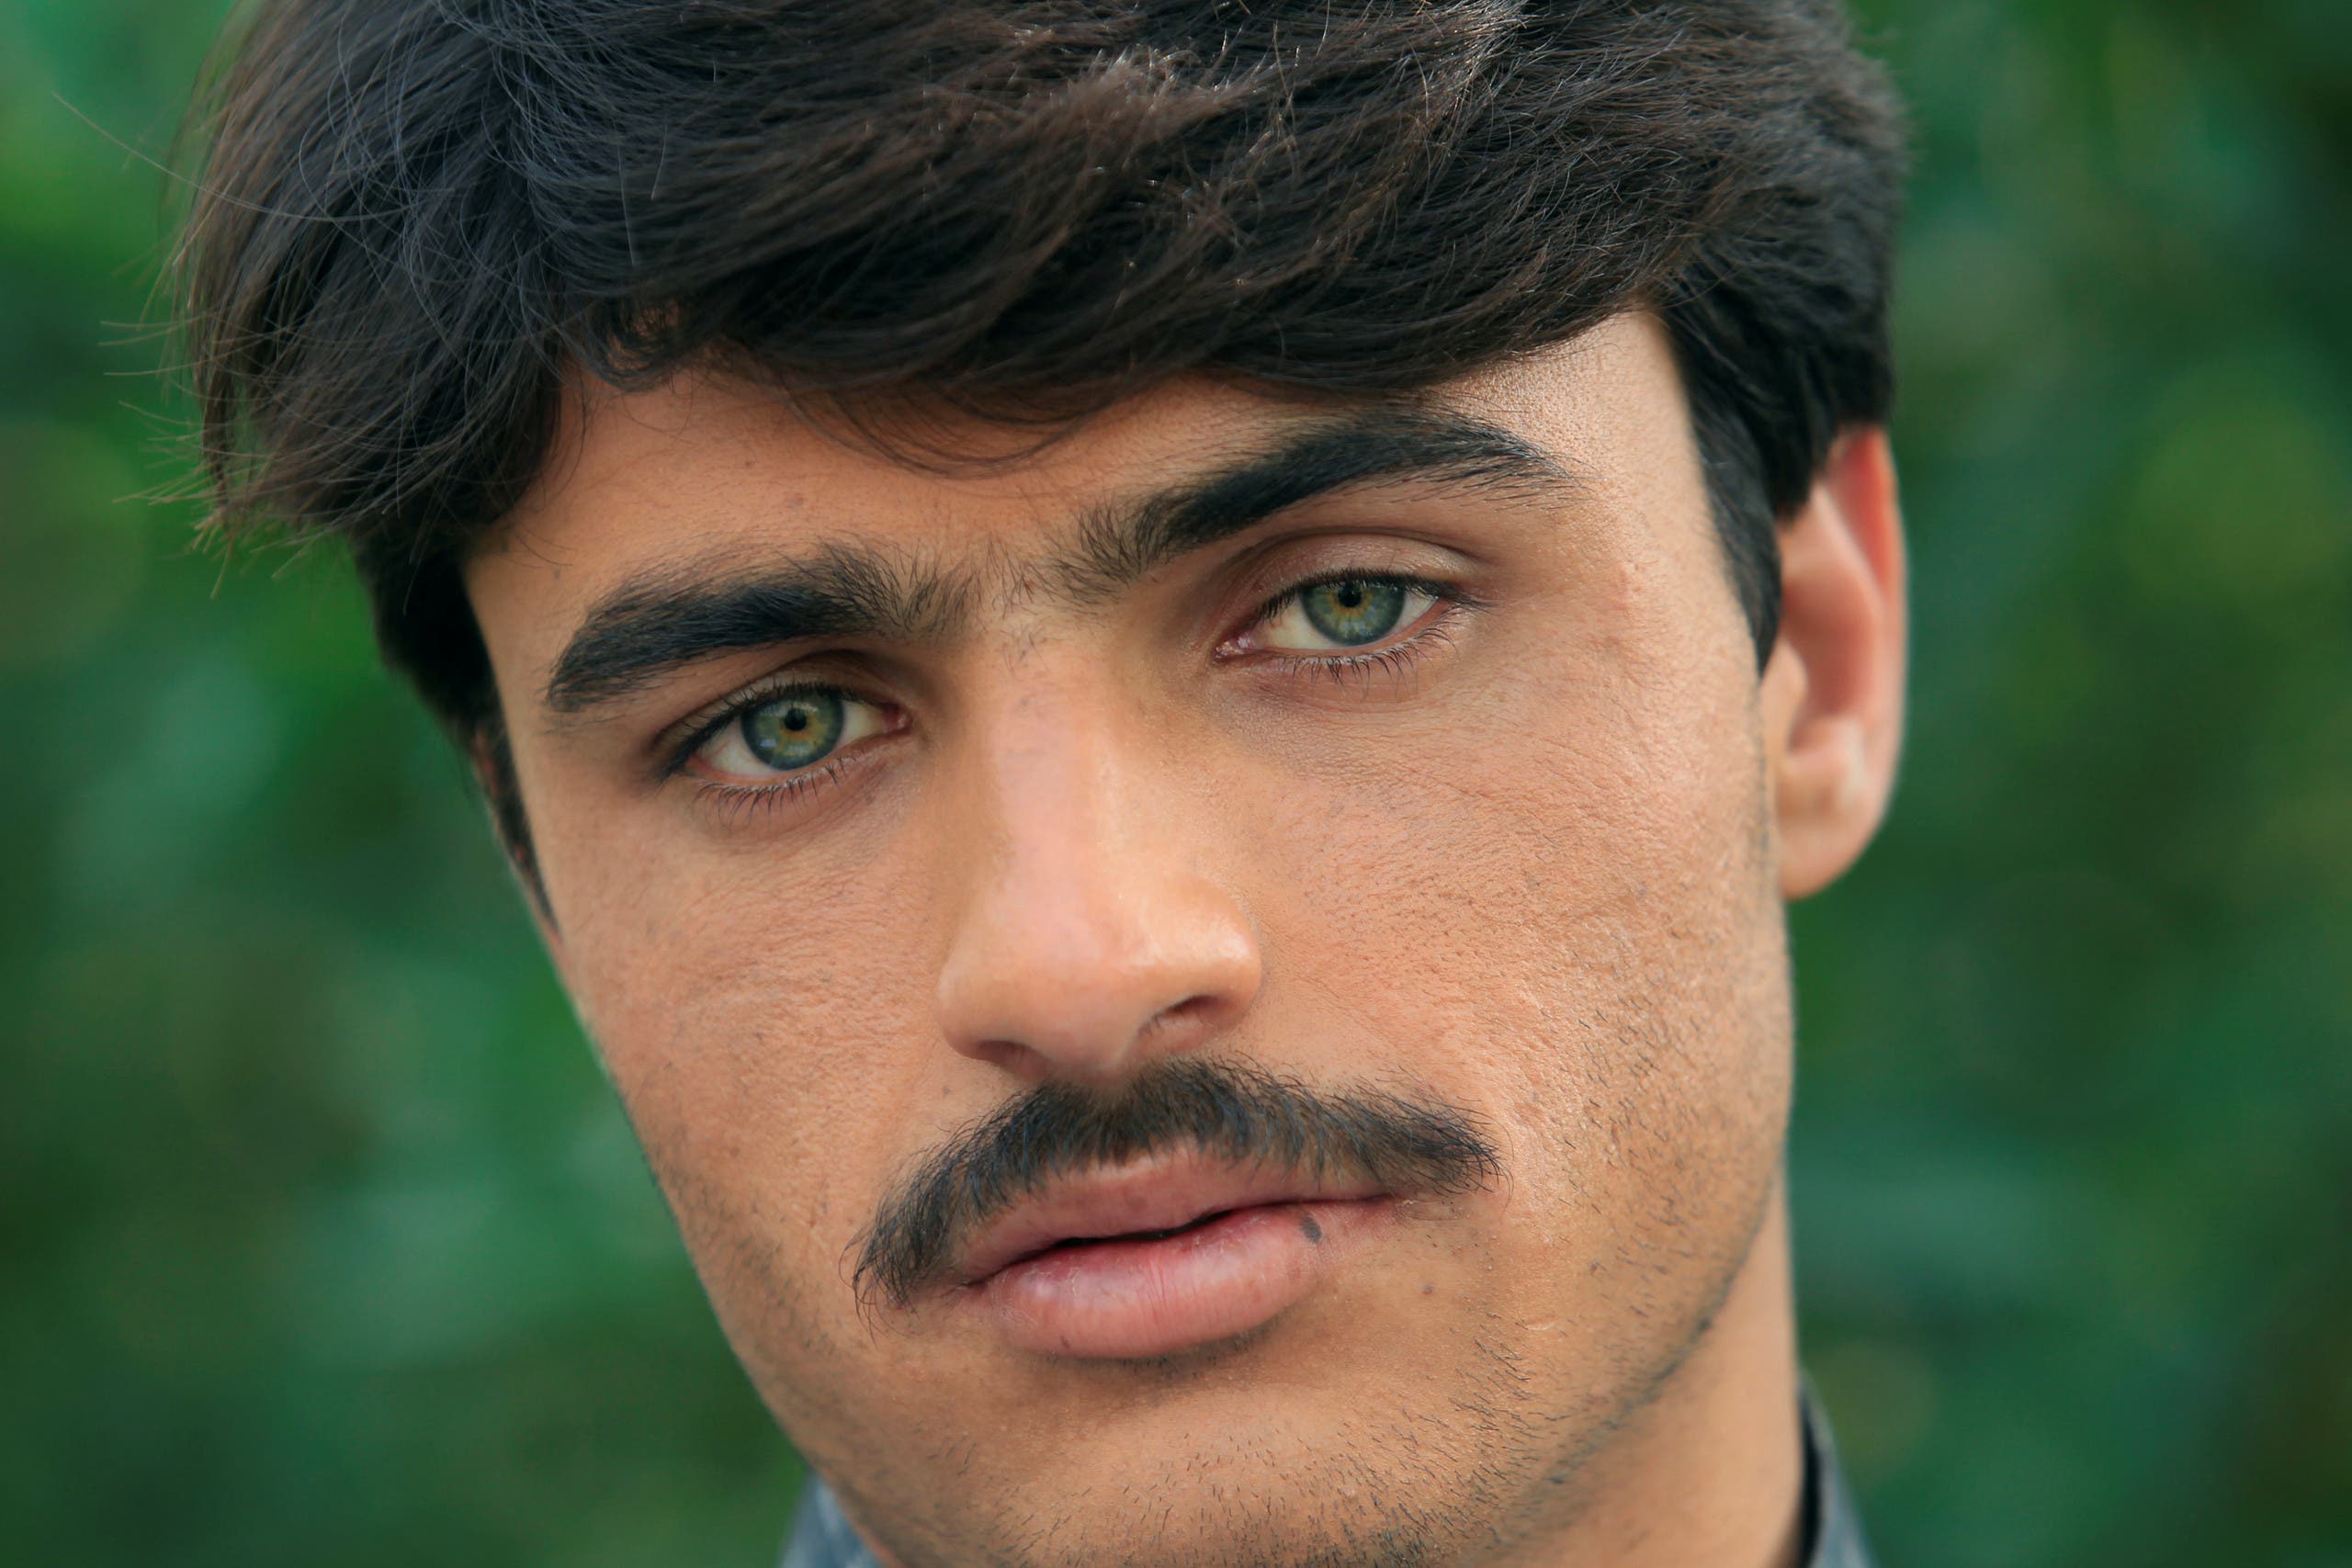 Arshad Khan, formerly a chai wala (tea seller) by profession, poses for a picture after doing a television interview in Islamabad, Pakistan October 20, 2016. reuters